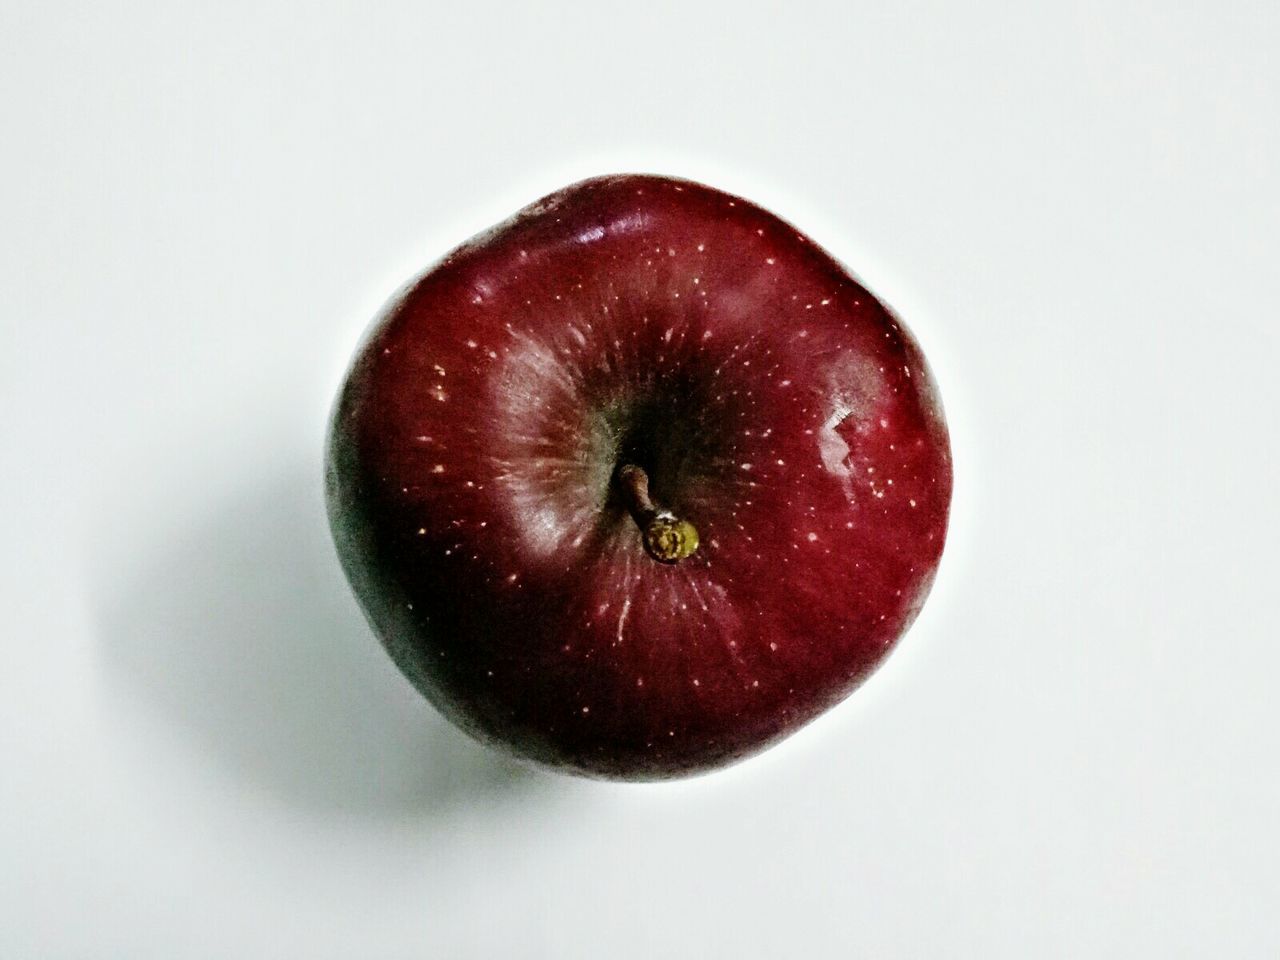 CLOSE-UP OF APPLE AGAINST WHITE BACKGROUND